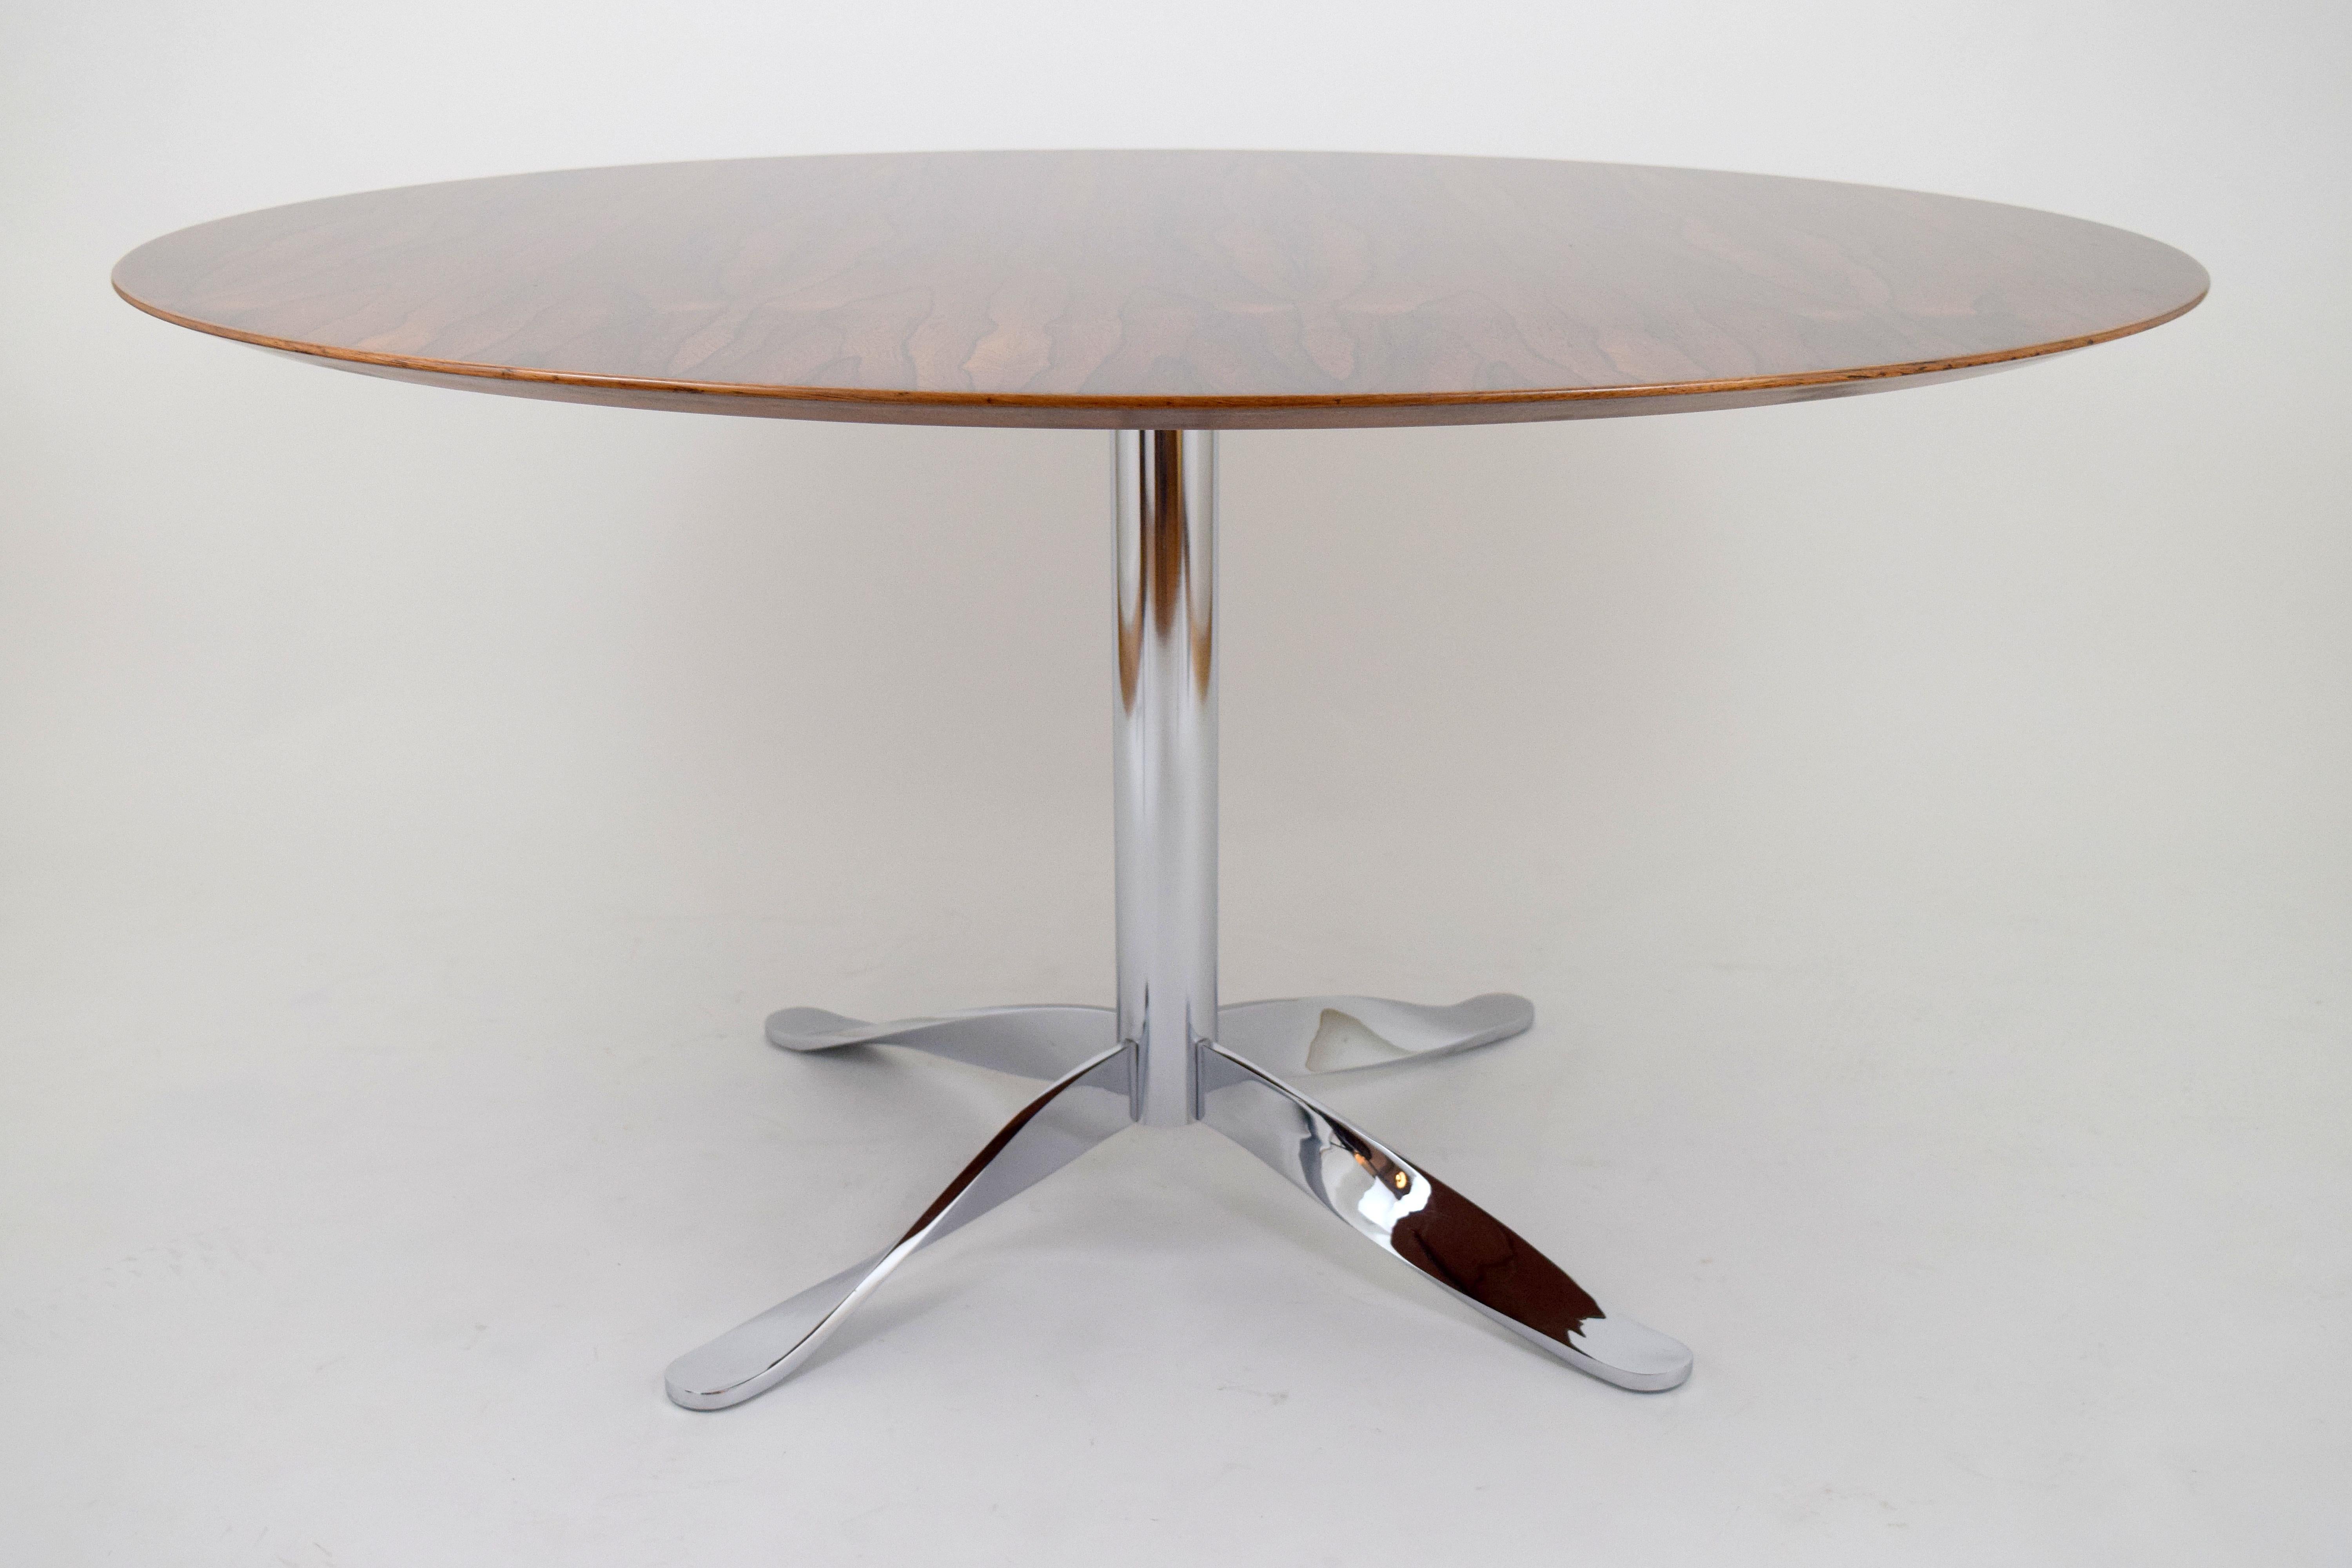 Stunning rosewood dining/conference table with unusual chrome twisted base. Gorgeous expressive grain to rosewood top with beveled edge detail. Supported by a polished chrome four-stared base with twisted legs. Very architectural and high quality